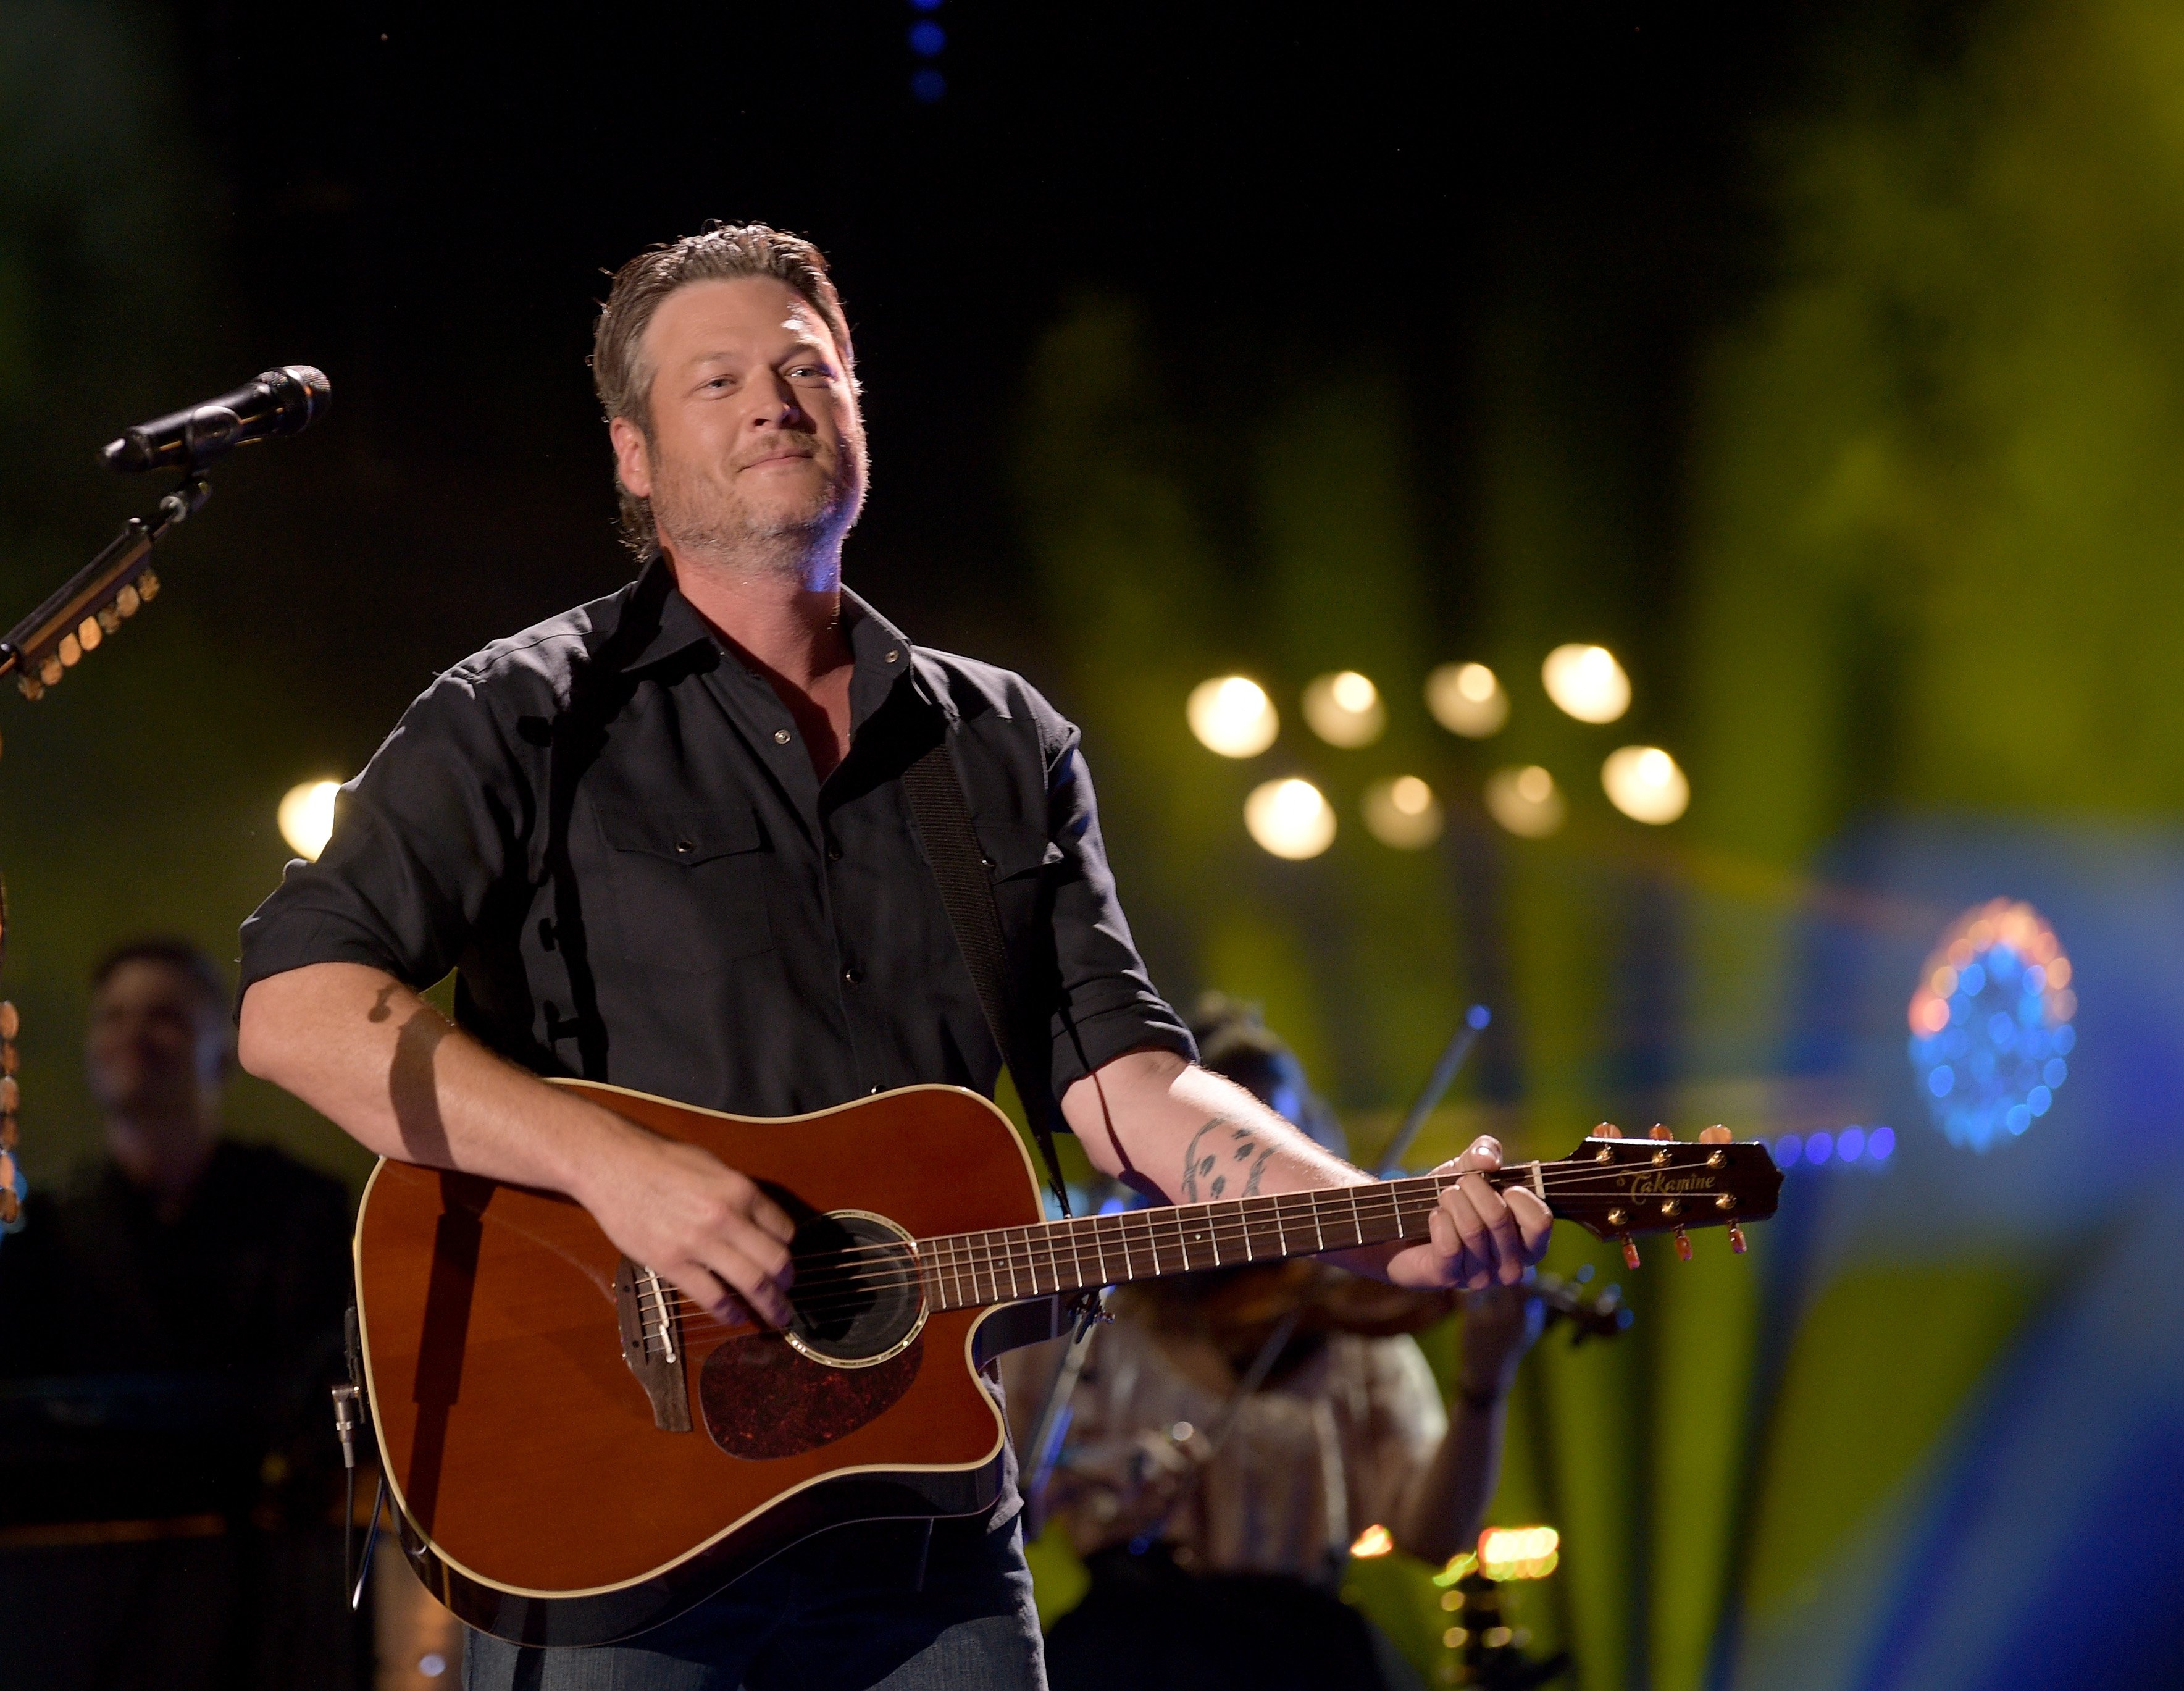 Blake Shelton performs onstage during the 2018 CMA Music festival at Nissan Stadium on June 8, 2018. | Photo: GettyImages